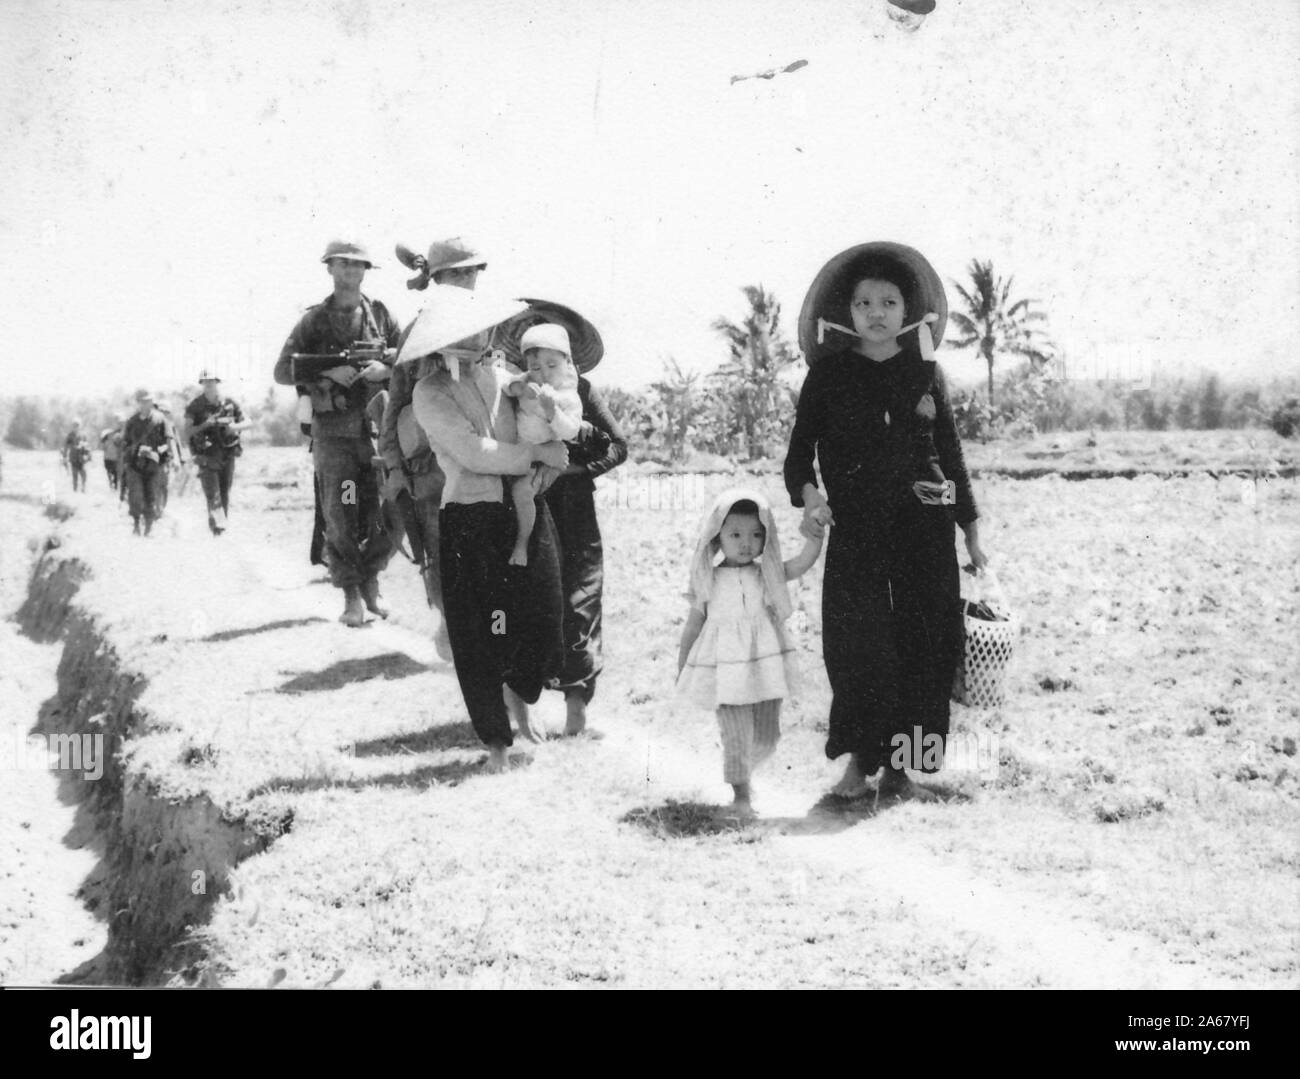 Civilian Vietnamese women and children, walk on a dirt path on a sunny day, in front of a staggered line of American servicemen, Vietnam, 1965. () Stock Photo